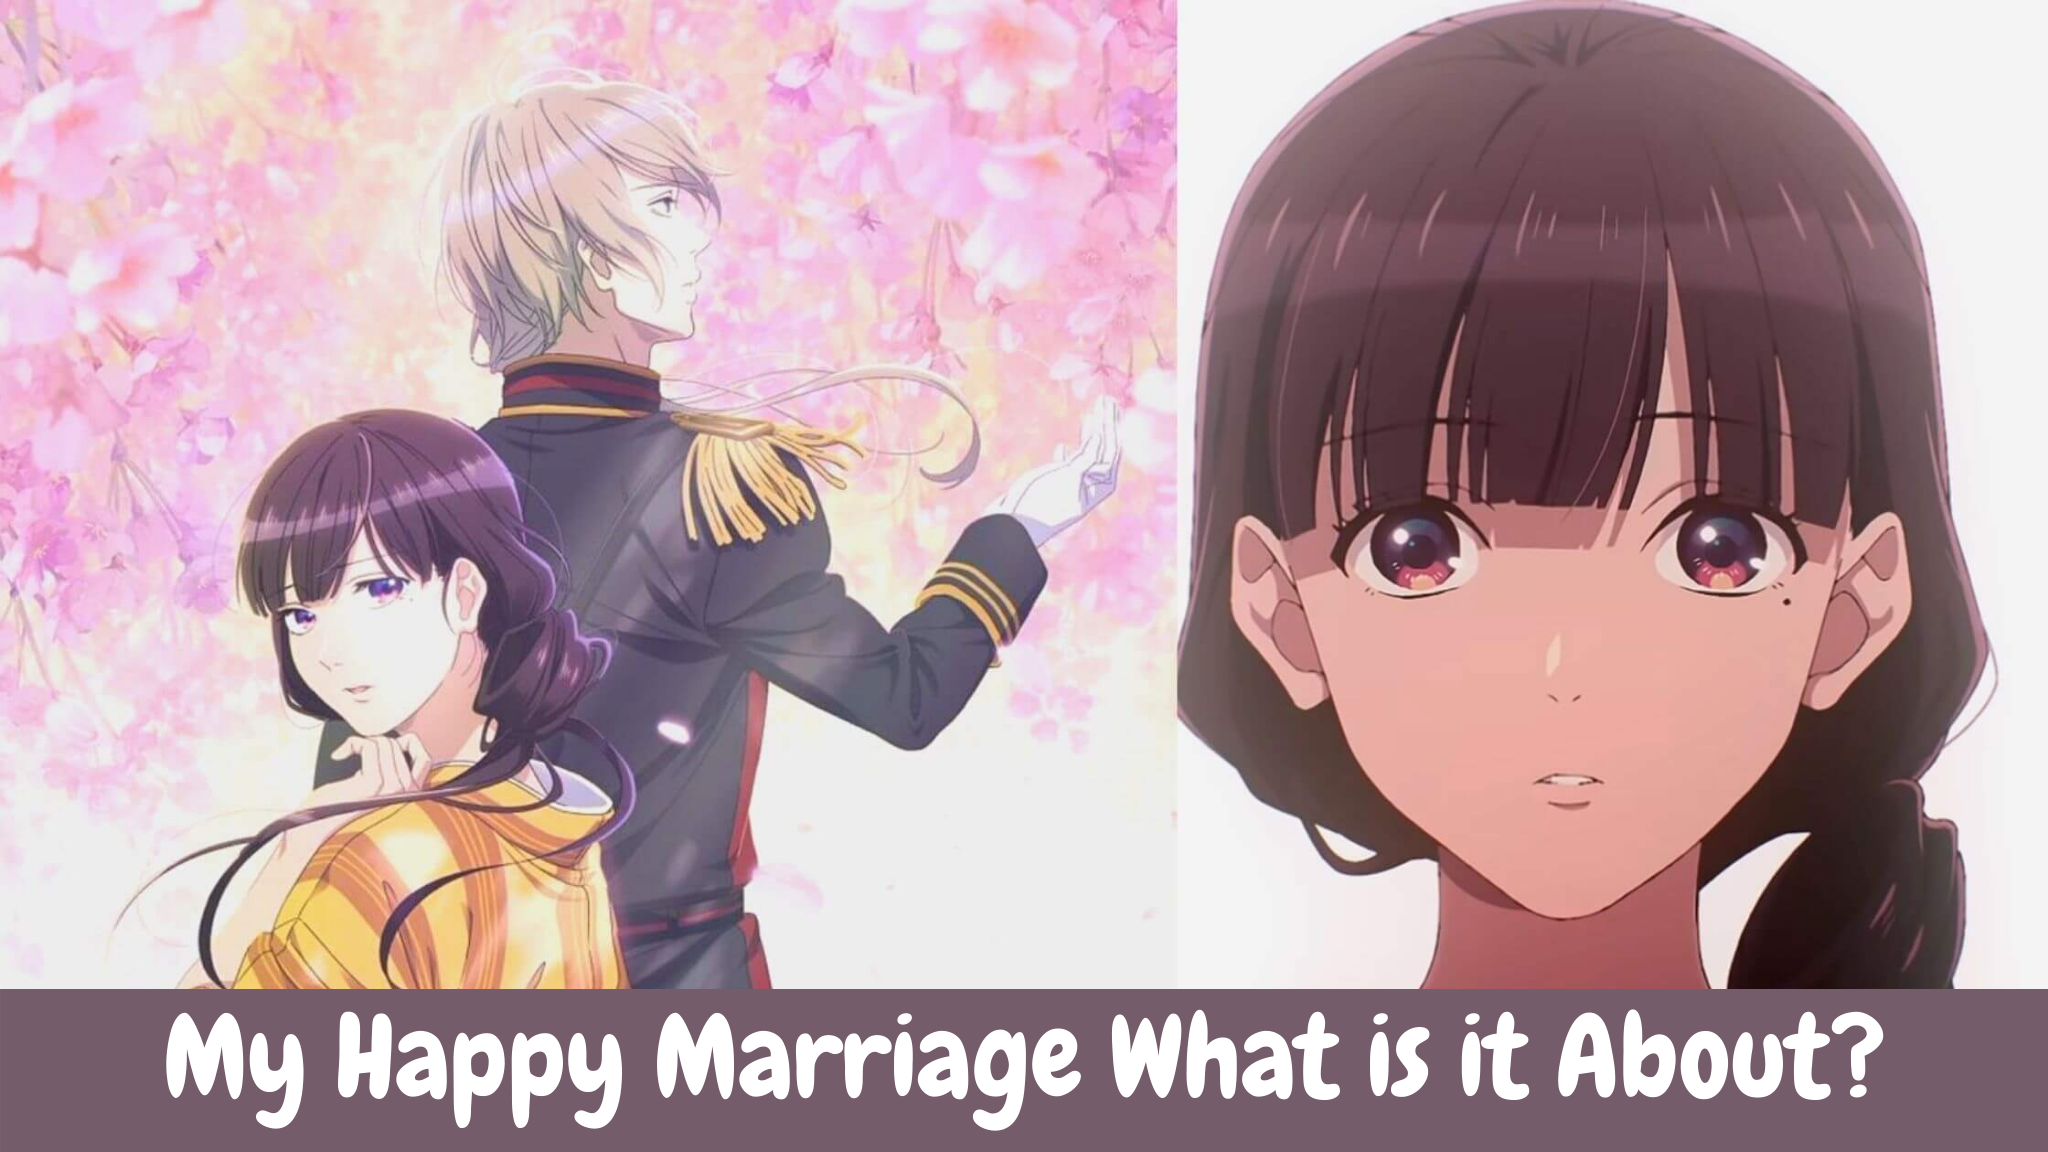 My Happy Marriage Trailer, Filming, Plot and Much More!